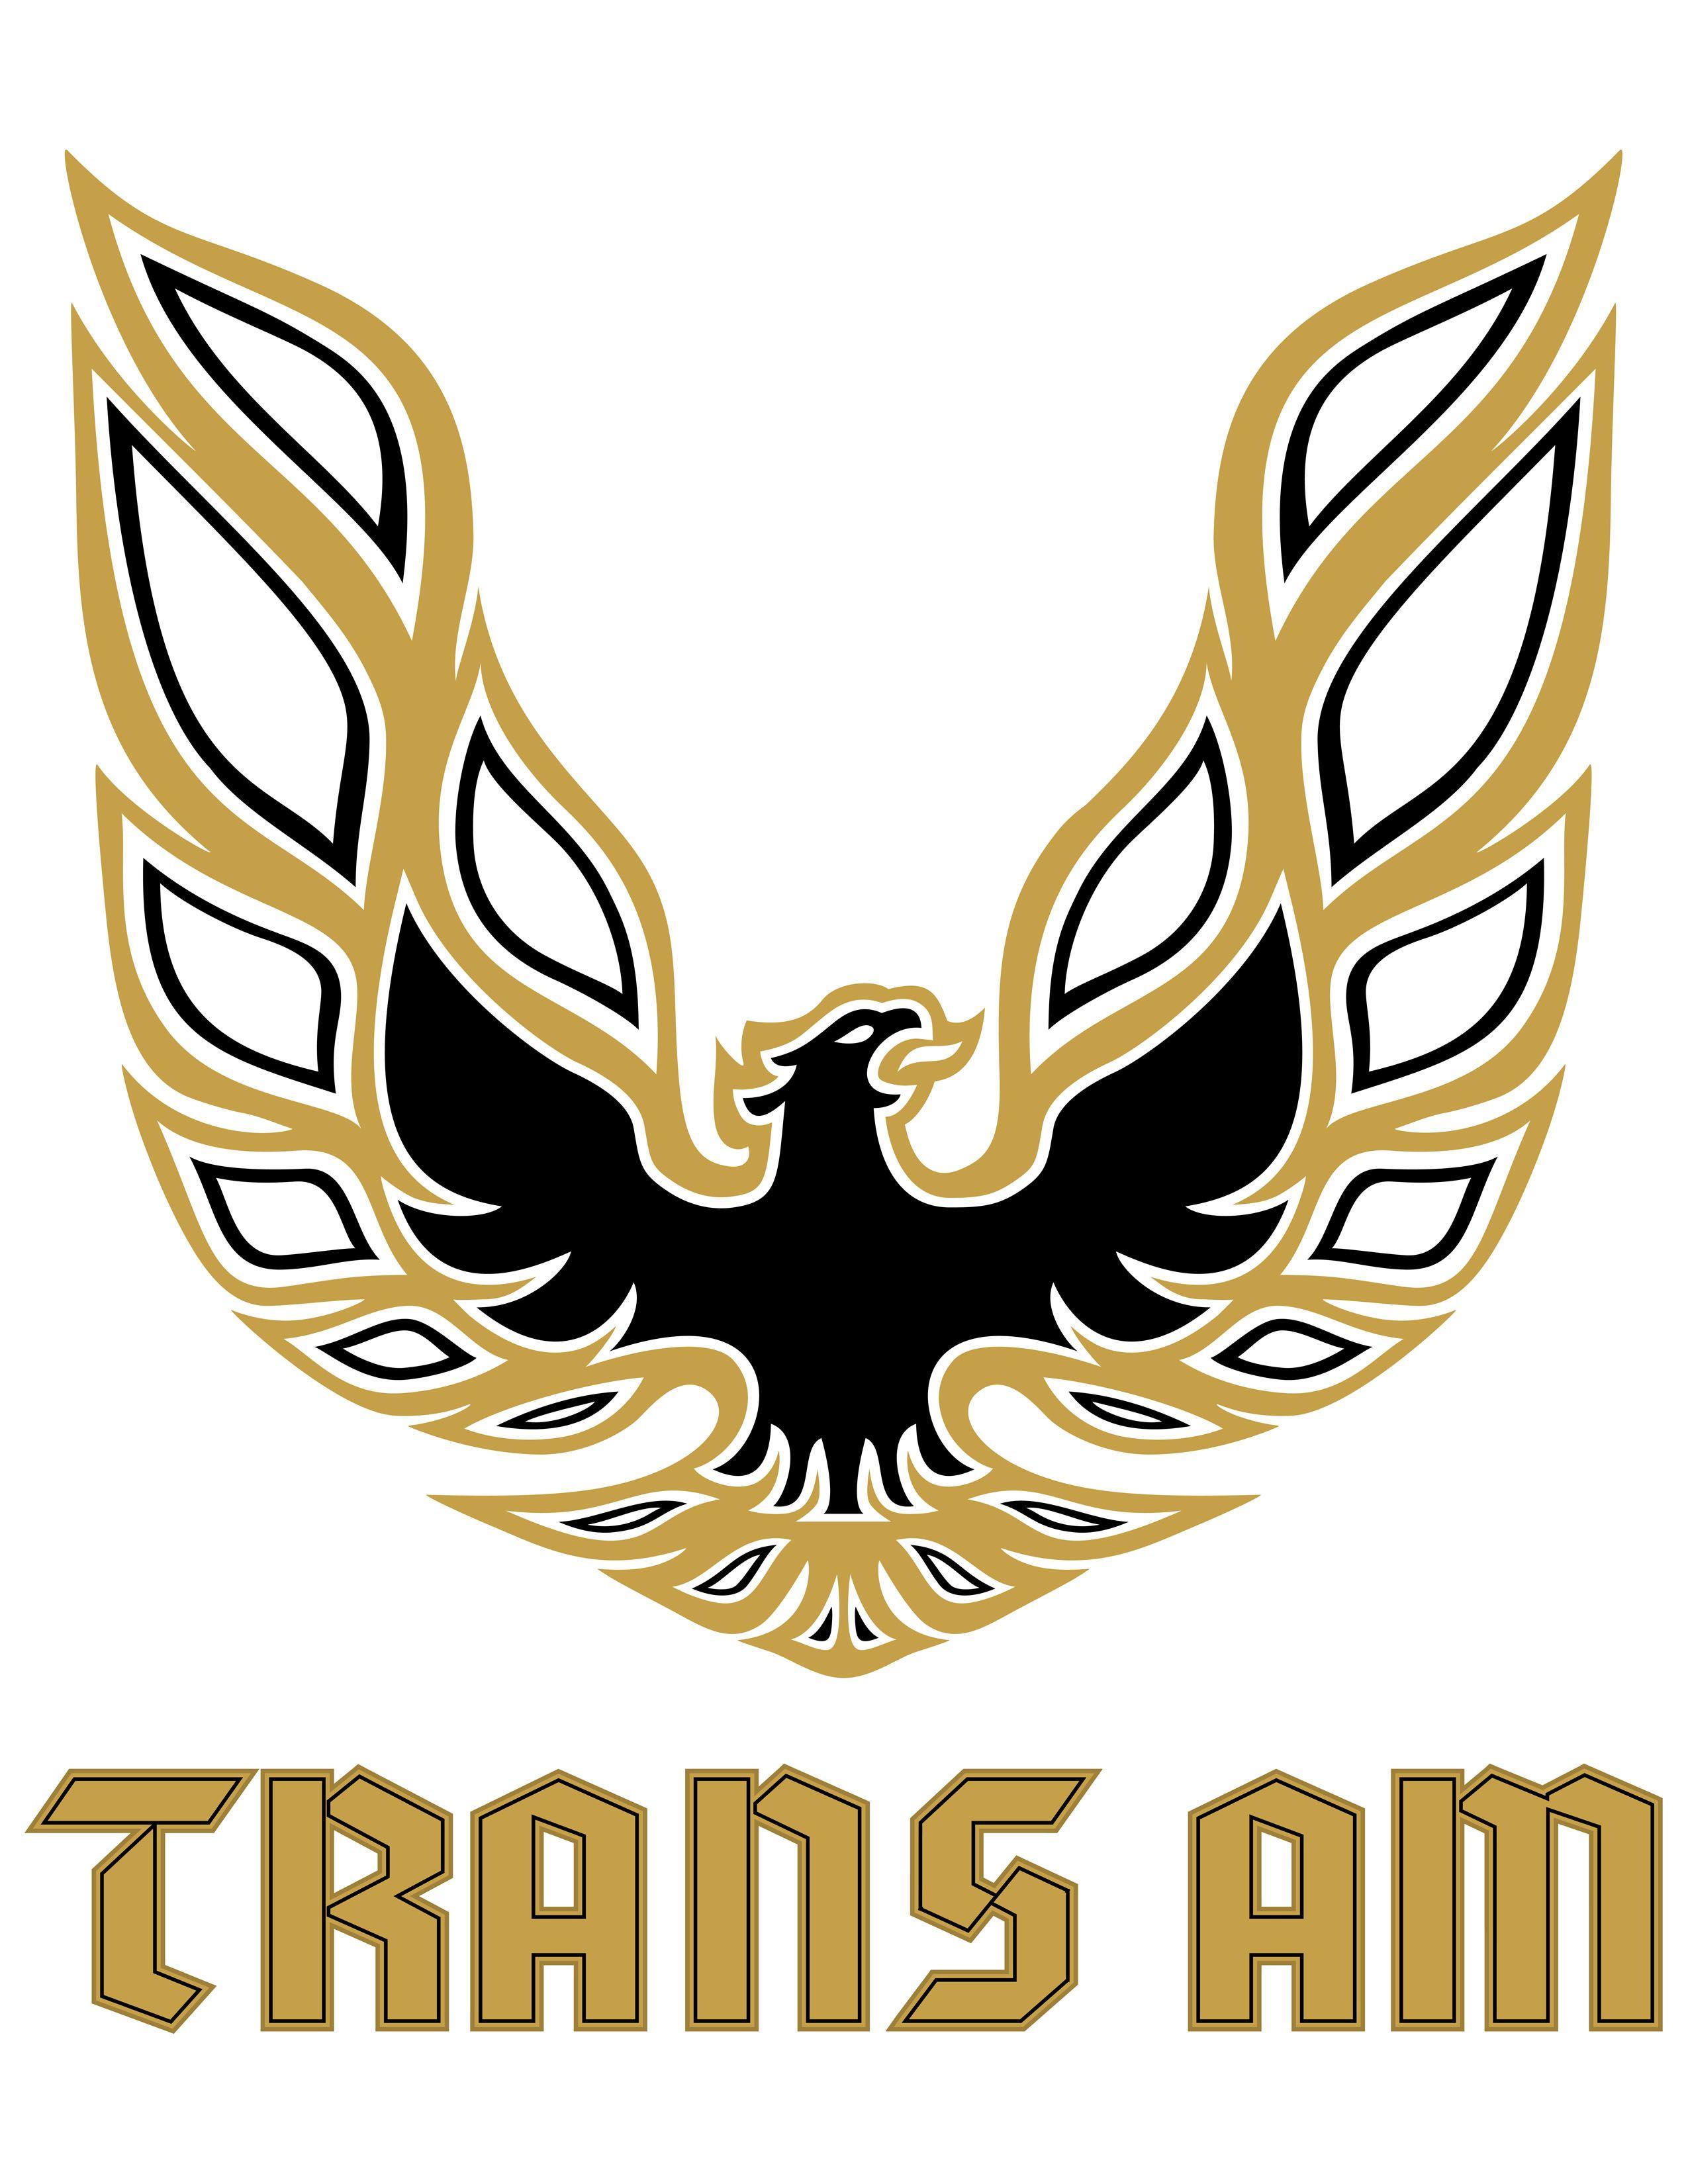 Trans AM Eagle Logo - 1978 trans am decal | ... 1978 Trans Am. The text logo is the front ...